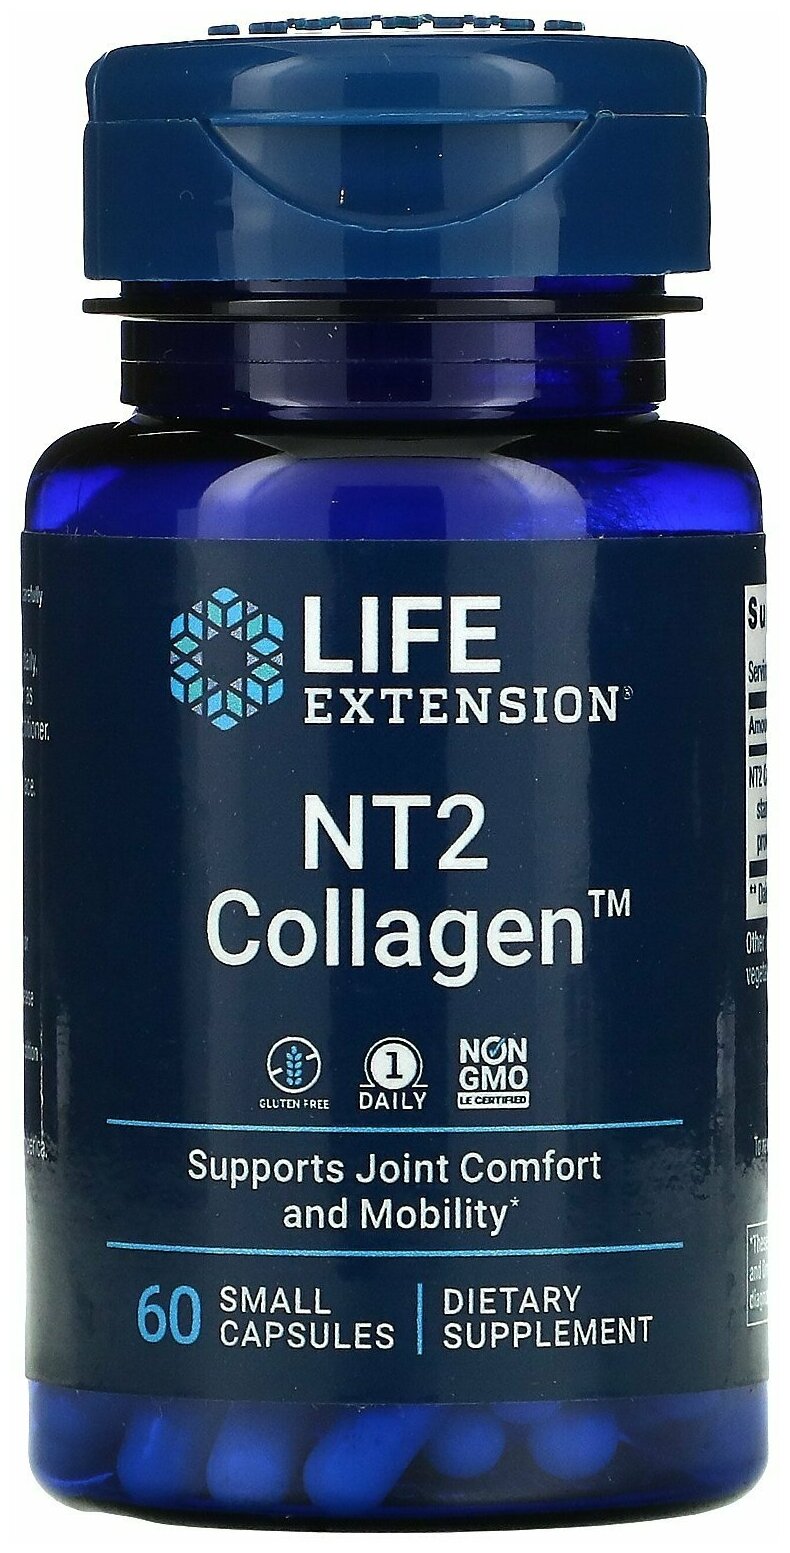 Life Extension NT2 Collagen 40 mg 60 Small Capsules